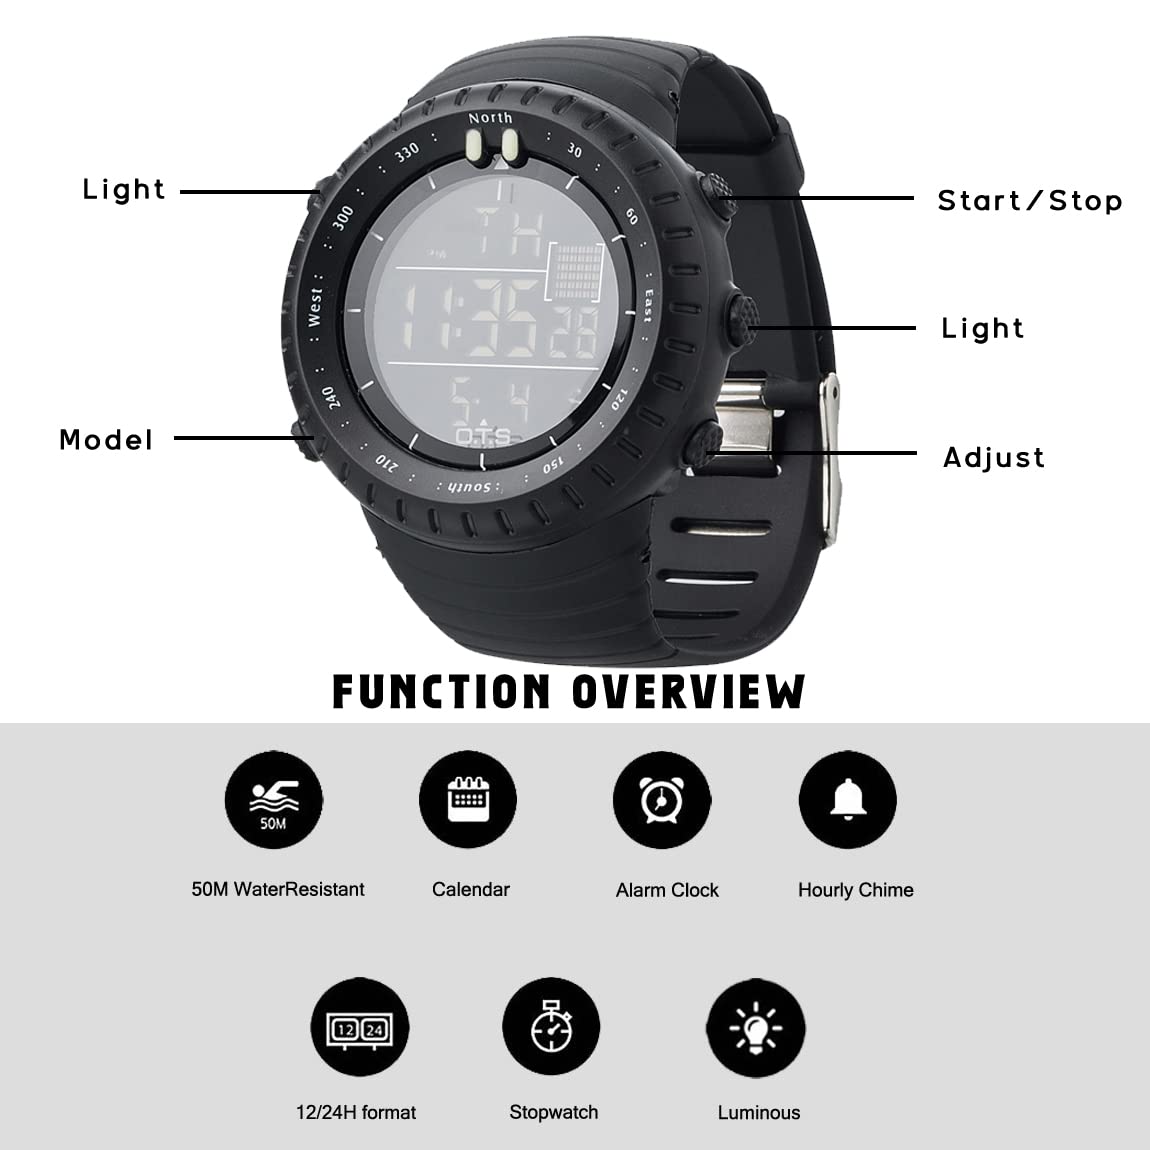 PALADA Men's Digital Sports Watch Waterproof Tactical Watch with LED Backlight Watch for Men